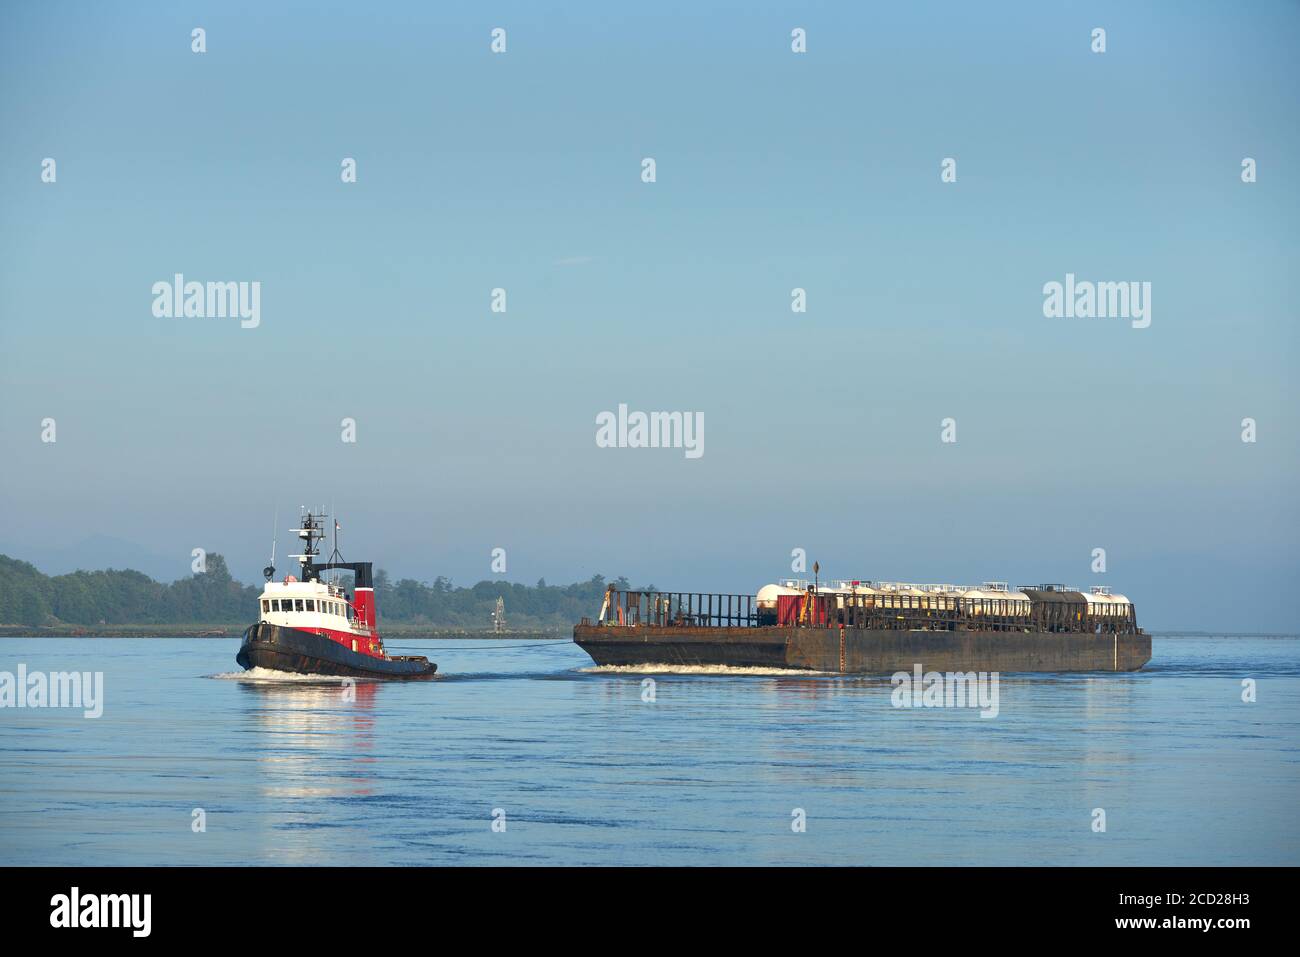 Tugboat and Tanker Car Barge. A tugboat towing tankers on a rail barge up the Fraser River. Richmond, British Columbia, Canada. Stock Photo